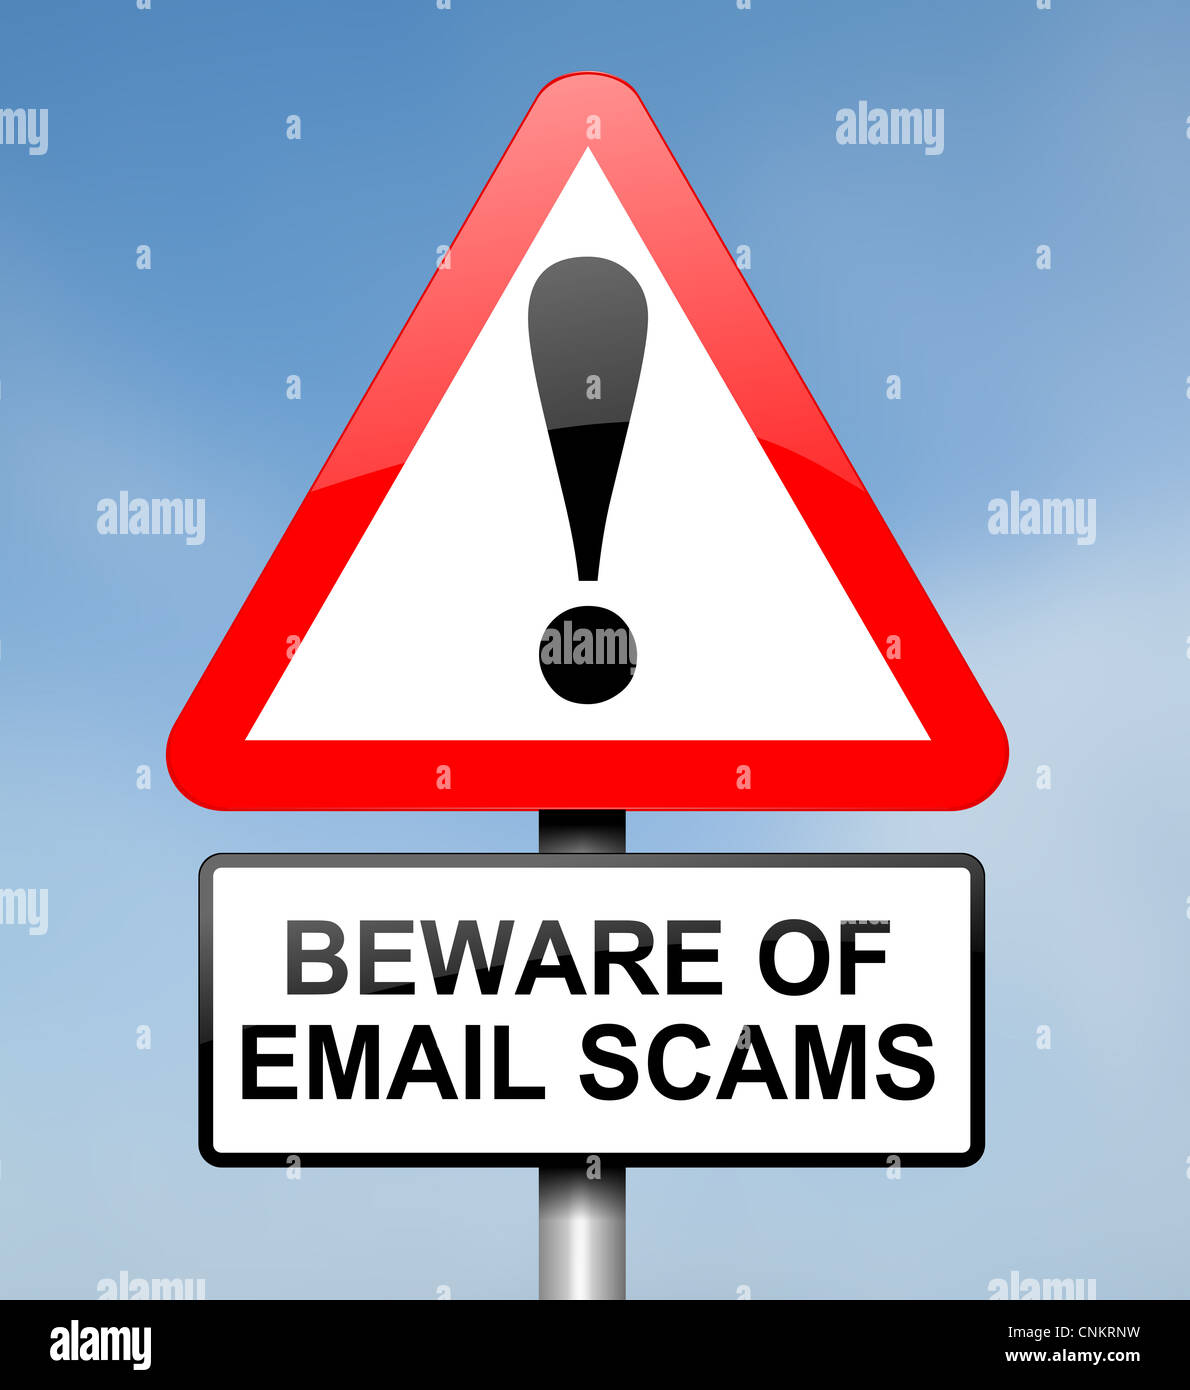 Email scam warning. Stock Photo